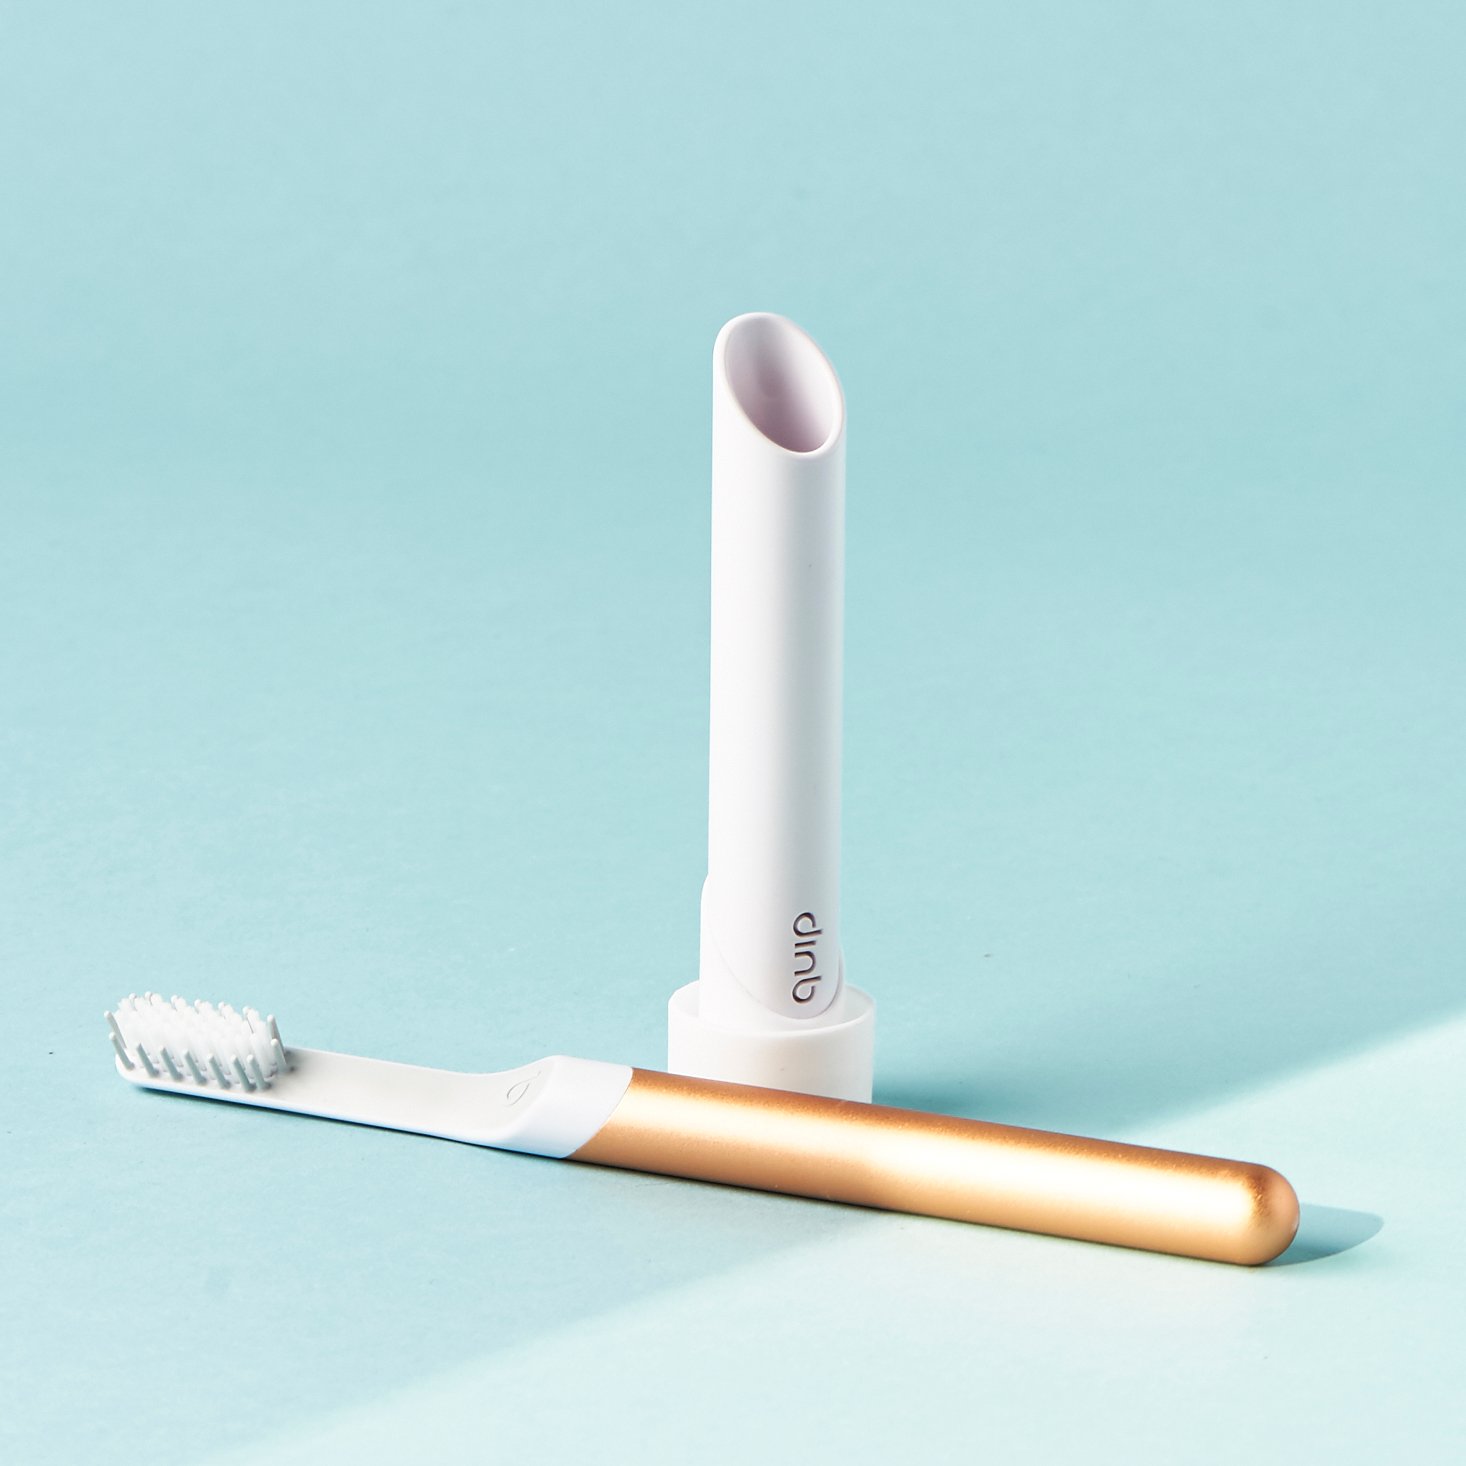 Quip toothbrush and toothbrush holder